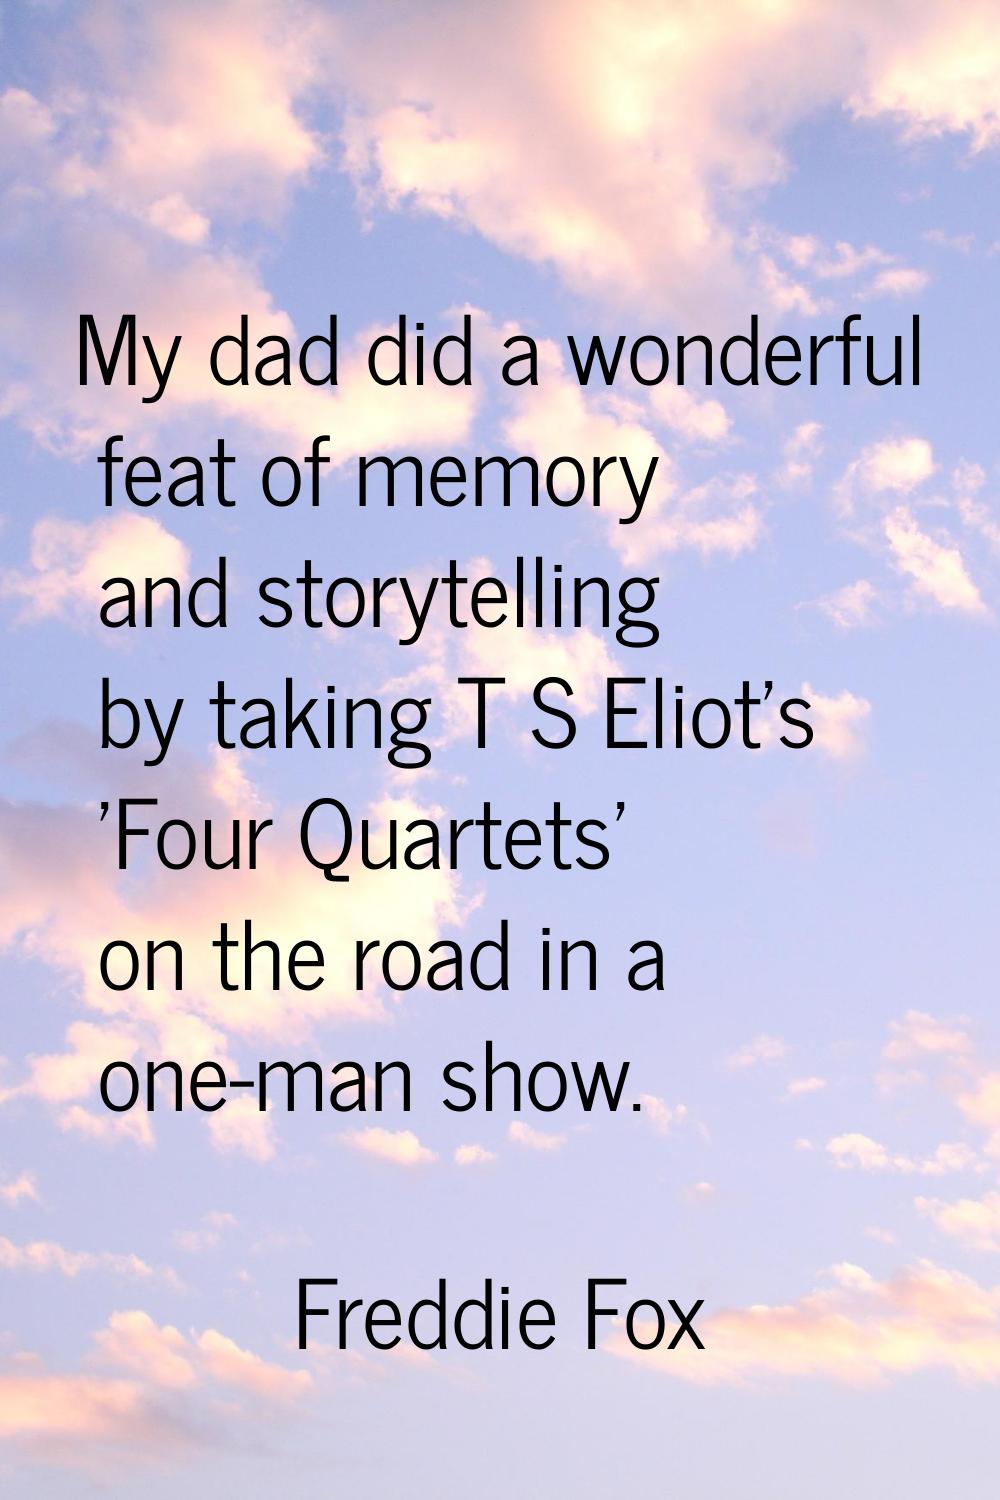 My dad did a wonderful feat of memory and storytelling by taking T S Eliot's 'Four Quartets' on the